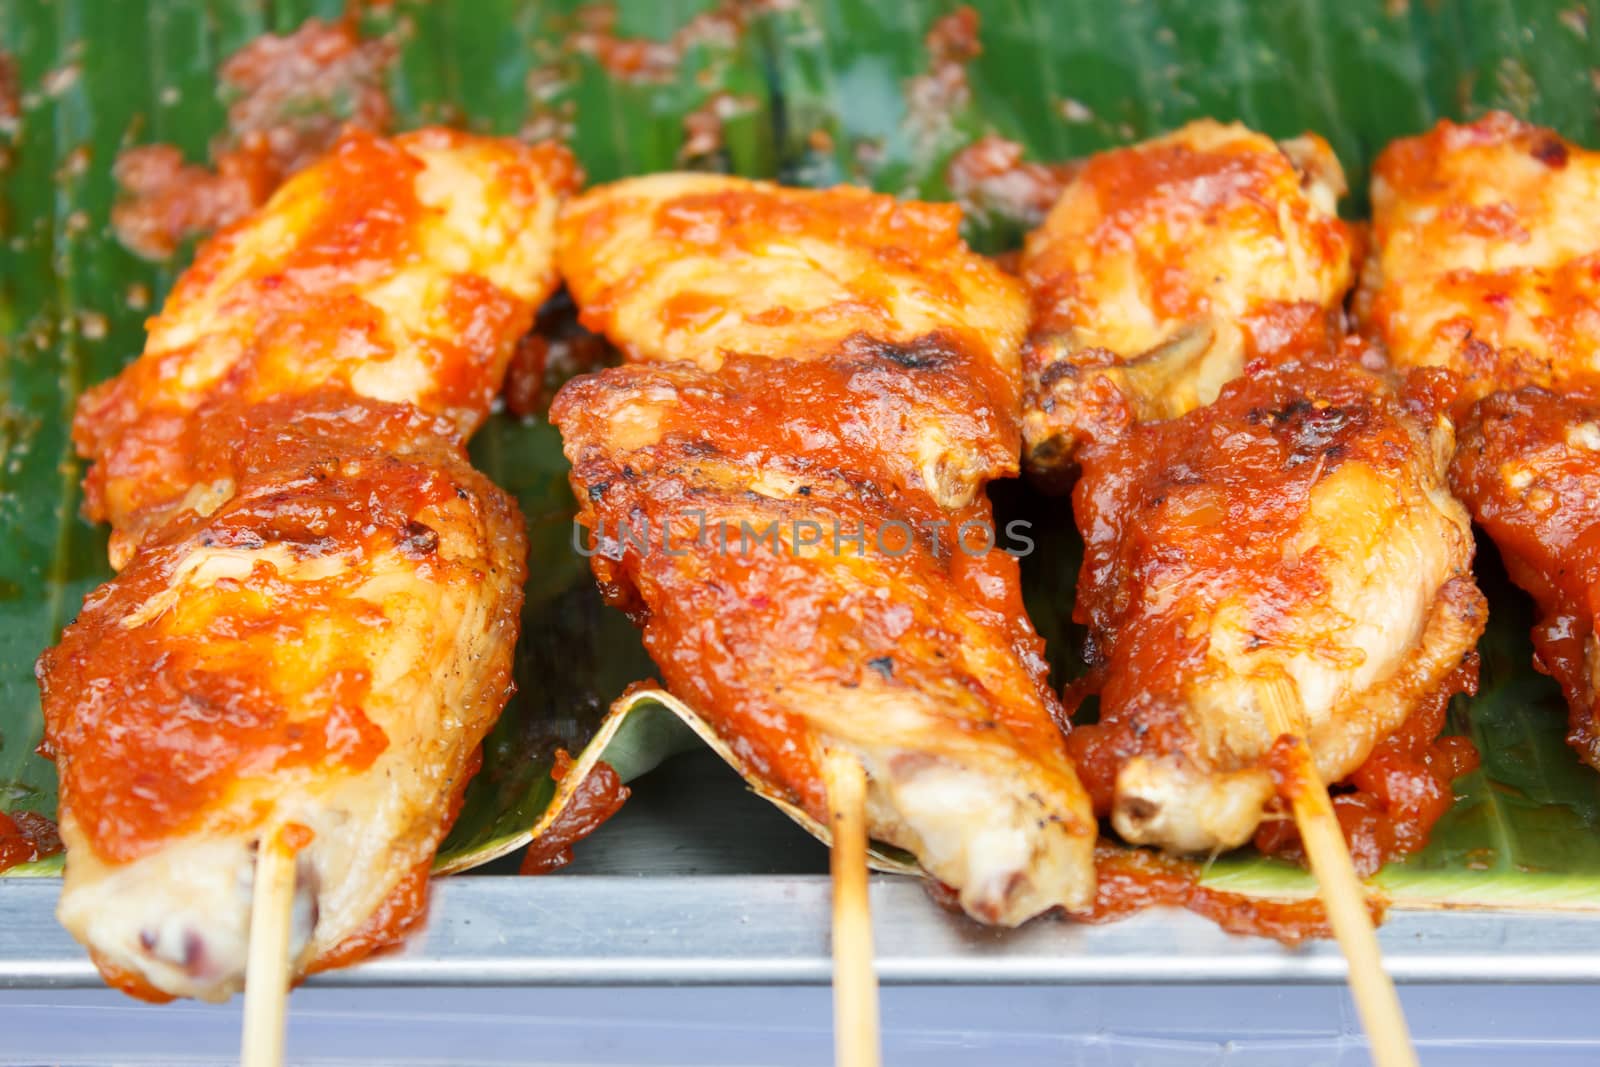 Grilled Chicken Wing with Spicy Sauce - Thai Style